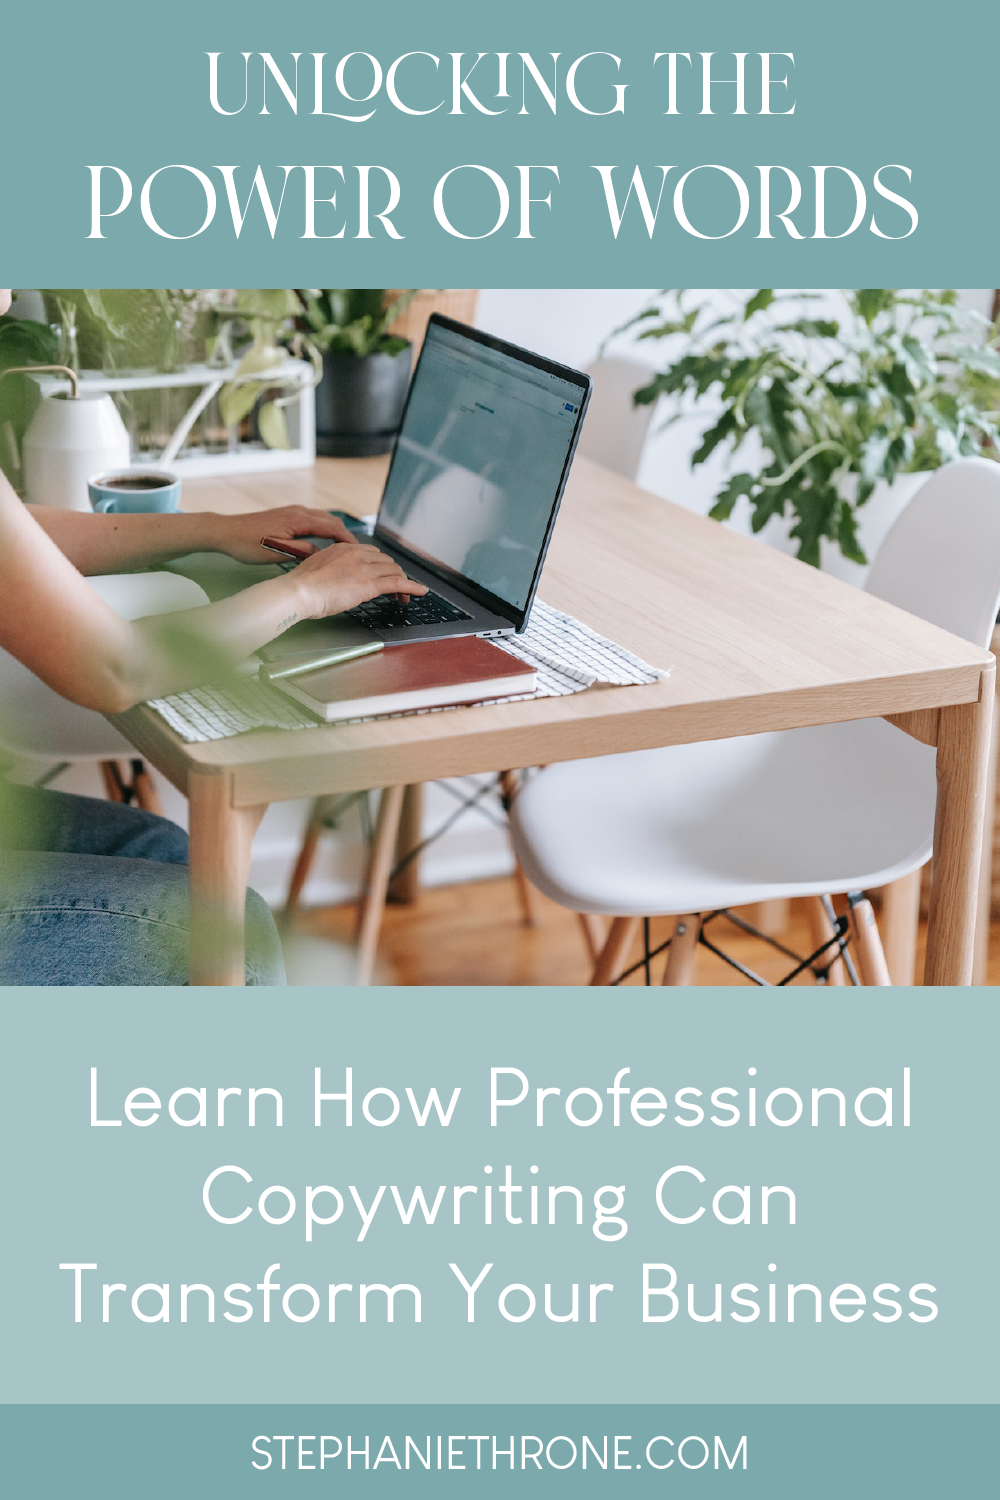 Professional Copywriting Can Transform Your Business